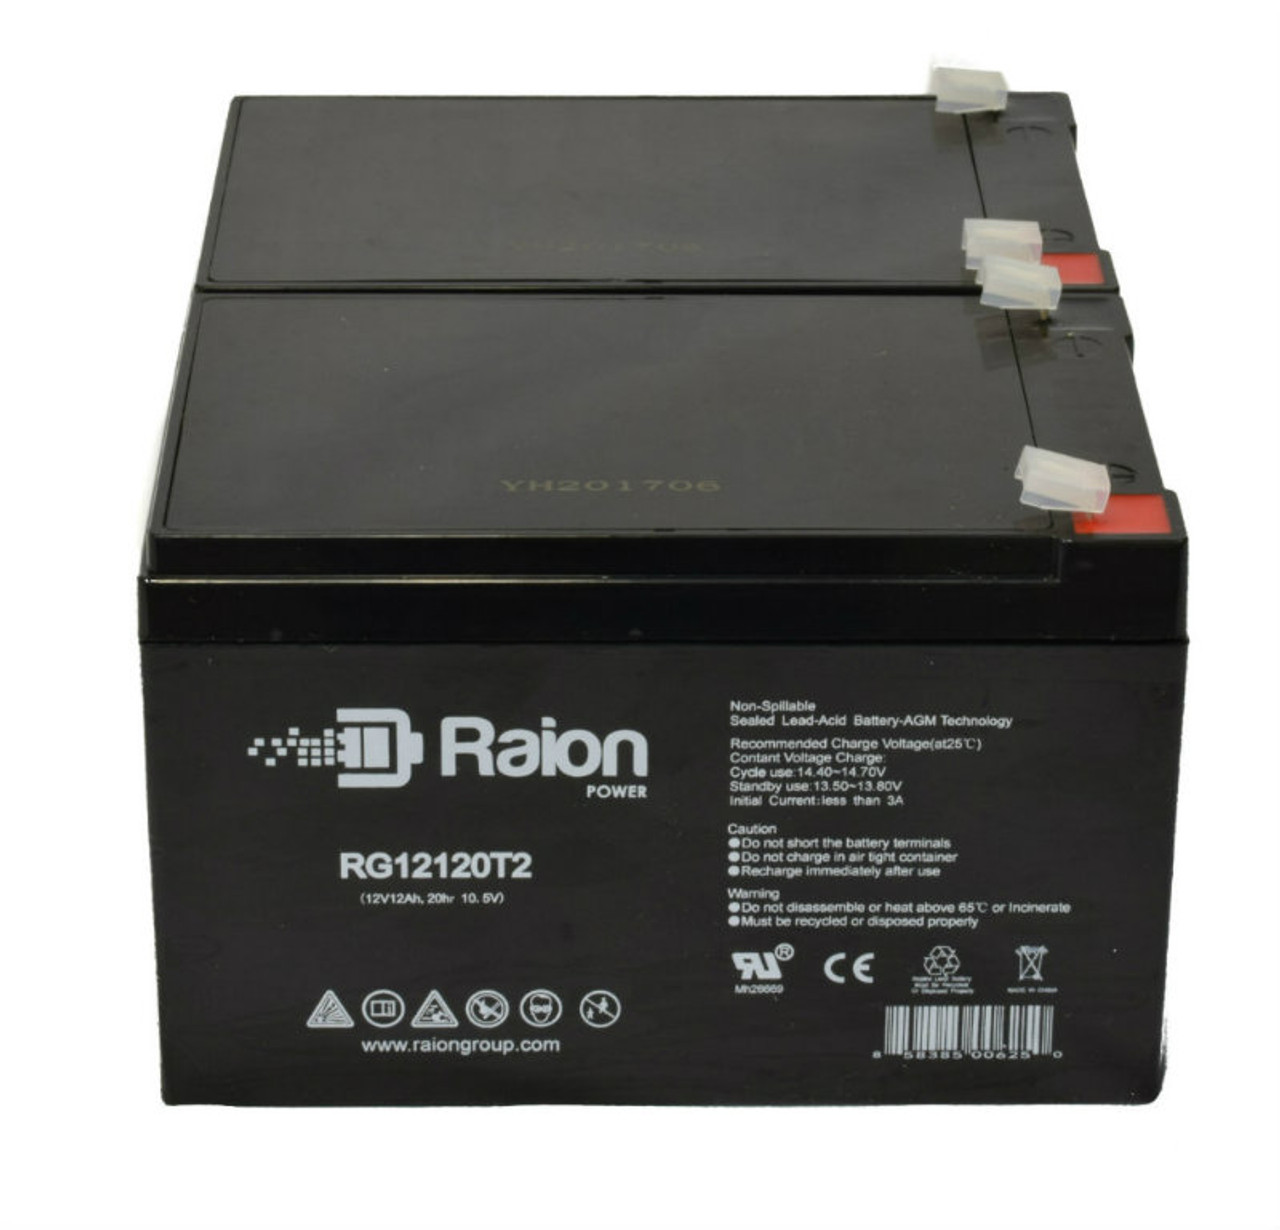 Raion Power 12V 12Ah Non-Spillable Compatible Replacement Battery for Sunlight SPA 12-12 - (2 Pack)